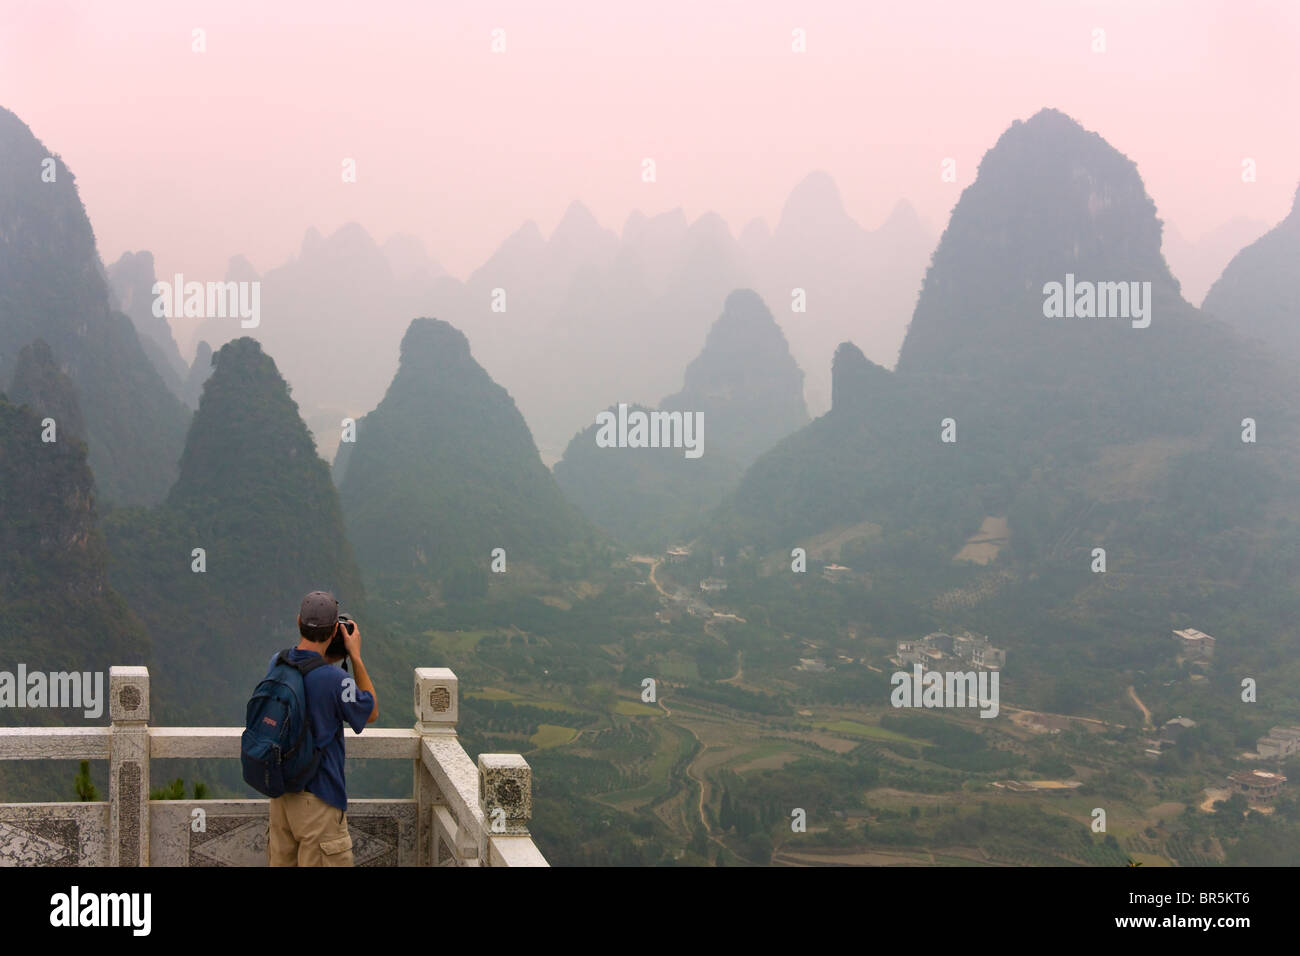 Traveler photographing karst hills and farmland in the Li River area, Yangshuo, Guangxi, China Stock Photo